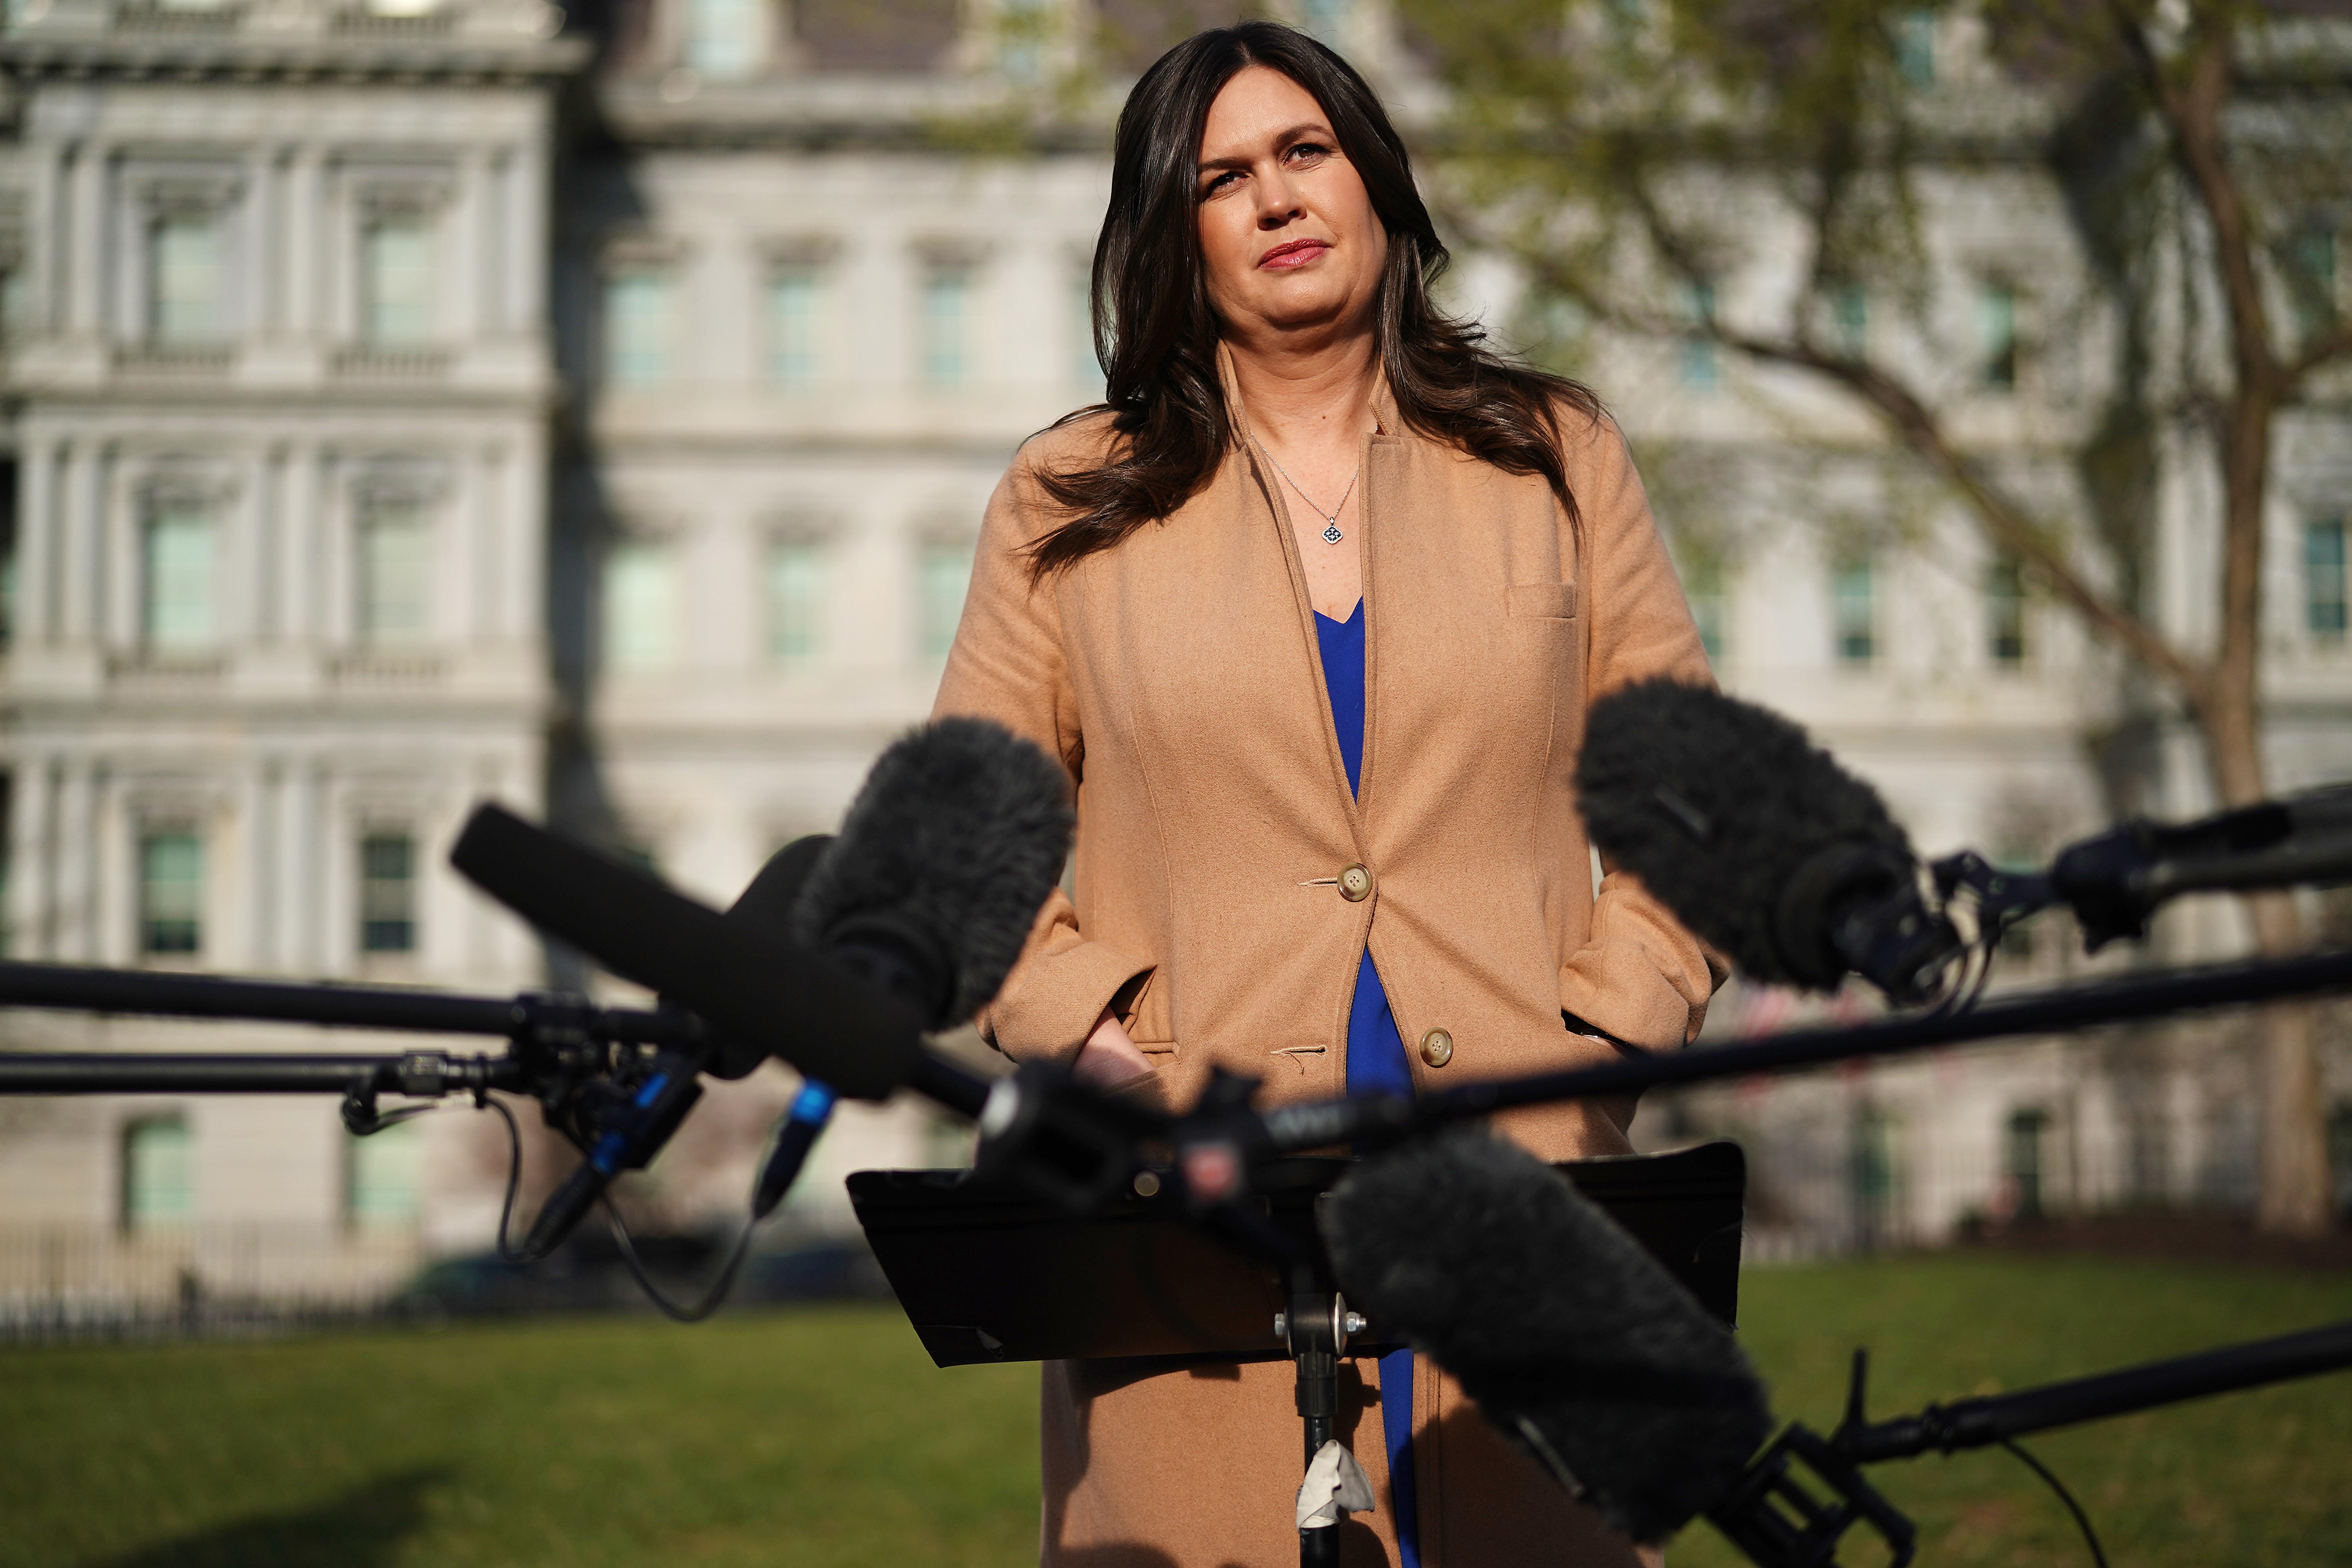 White House press secretary Sarah Huckabee Sanders talks to reporters outside the West Wing of the White House April 4, 2019 in Washington, D.C.